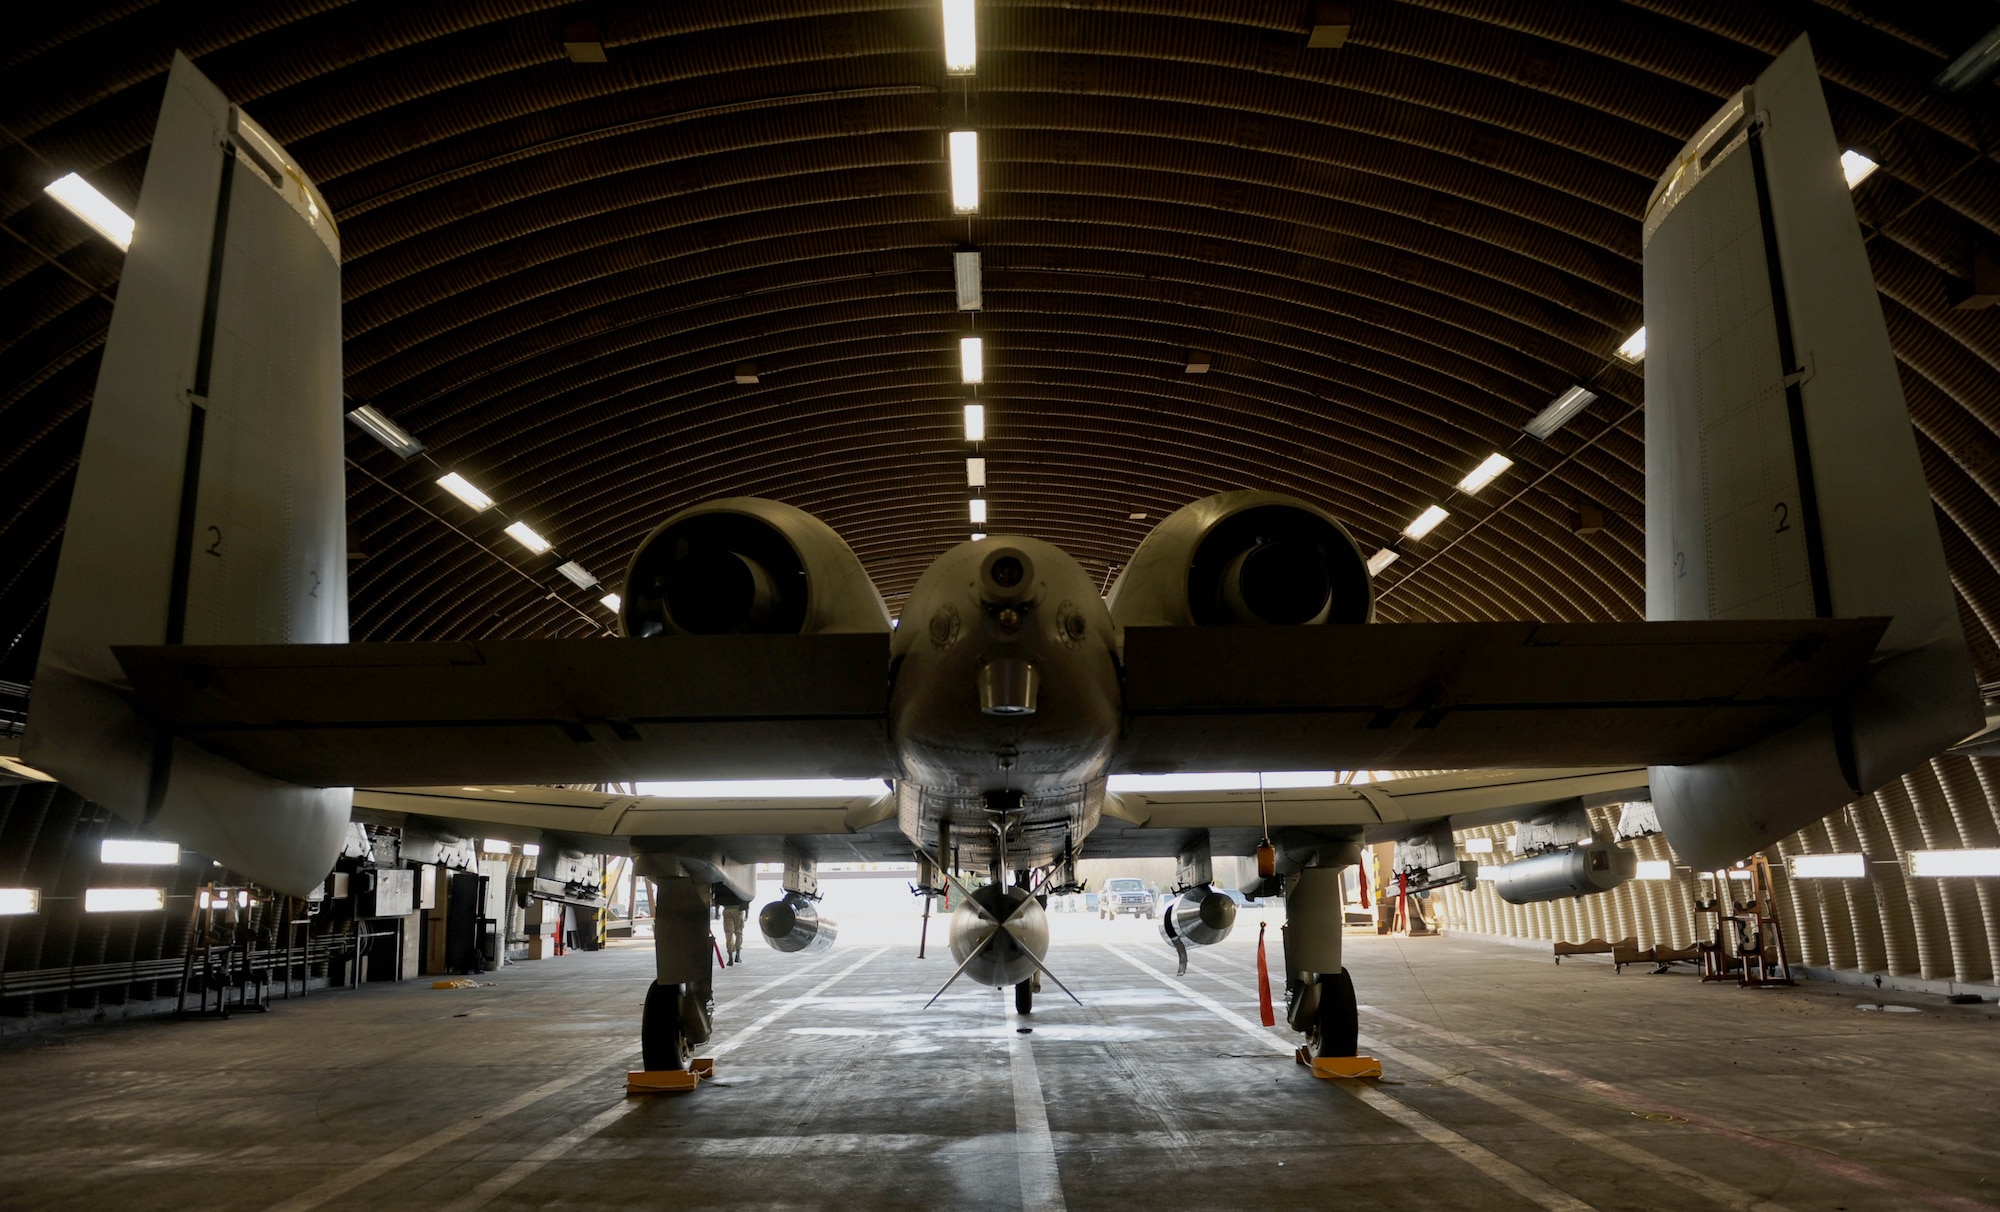 An A-10 Thunderbolt II aircraft assigned to the 354th Expeditionary Fighter Squadron sits inside a hardened aircraft shelter at Spangdahlem Air Base, Germany, Feb. 13, 2015. The A-10s deployed as part of a theater security package in support of Operation Atlantic Resolve. The Air Force has been conducting similar TSP rotations in the Pacific region since 2004. (U.S. Air Force photo by Airman 1st Class Timothy Kim/Released)